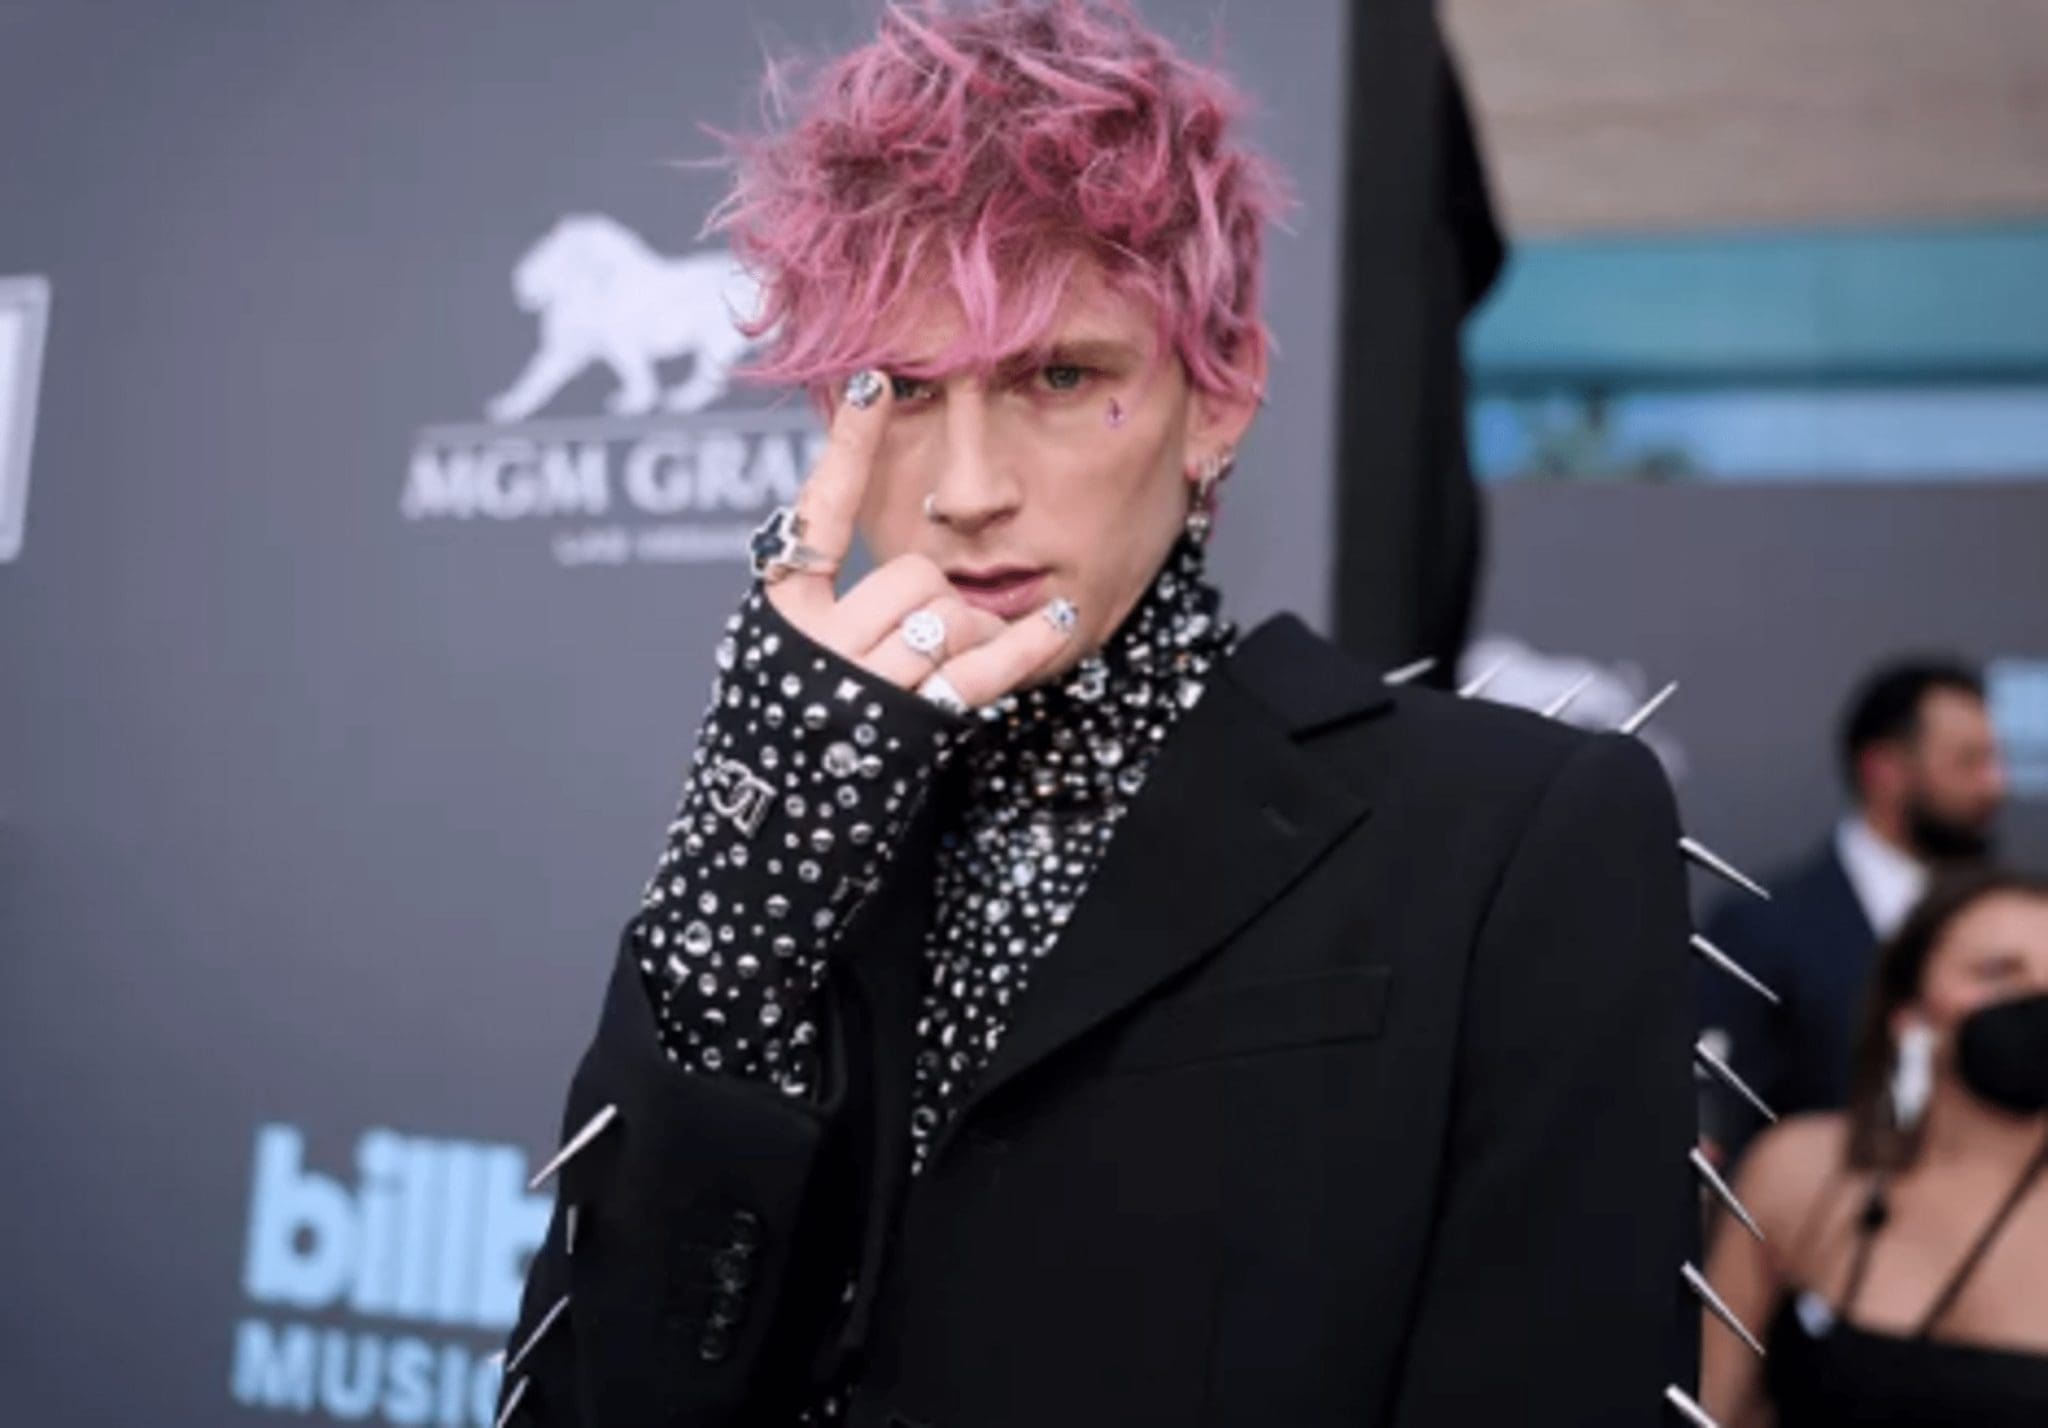 The Machine Gun Kelly star's $30K manicure at the Billboard Music Awards serves as the inspiration for Marrow Fine's debut ring collection.